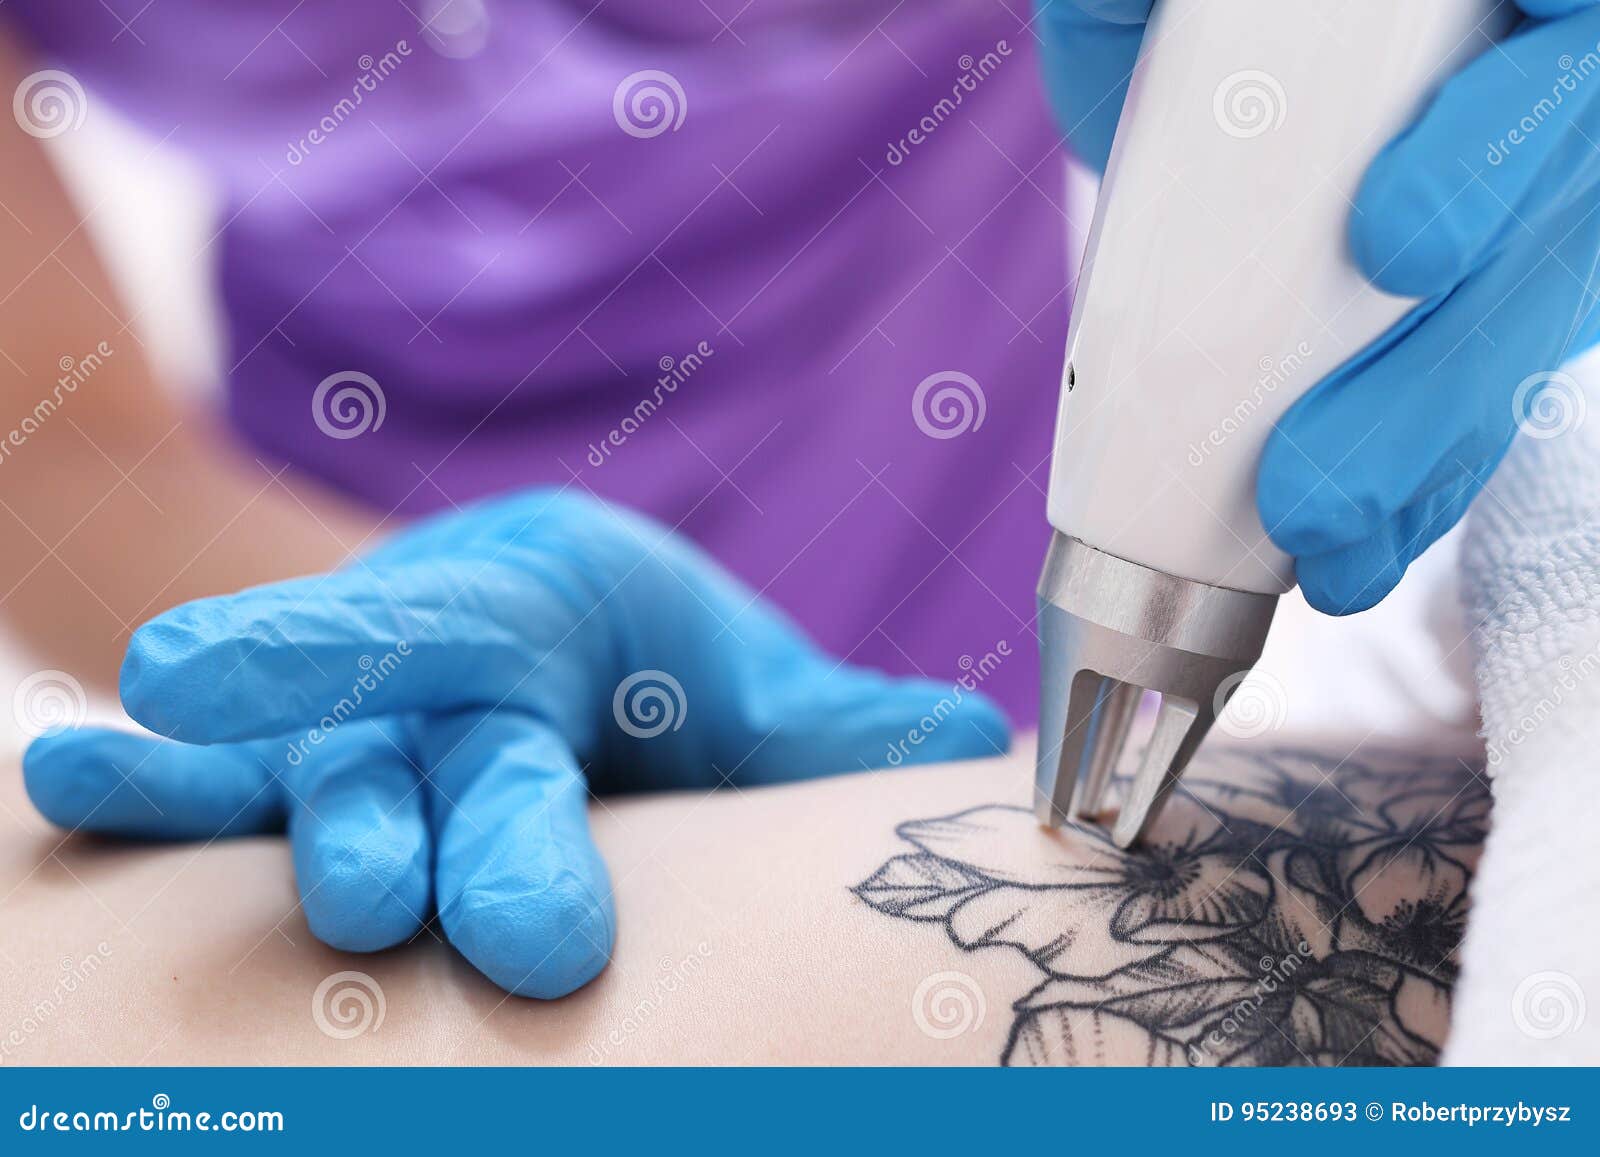 laser tattoo removal in cosmetic surgery.